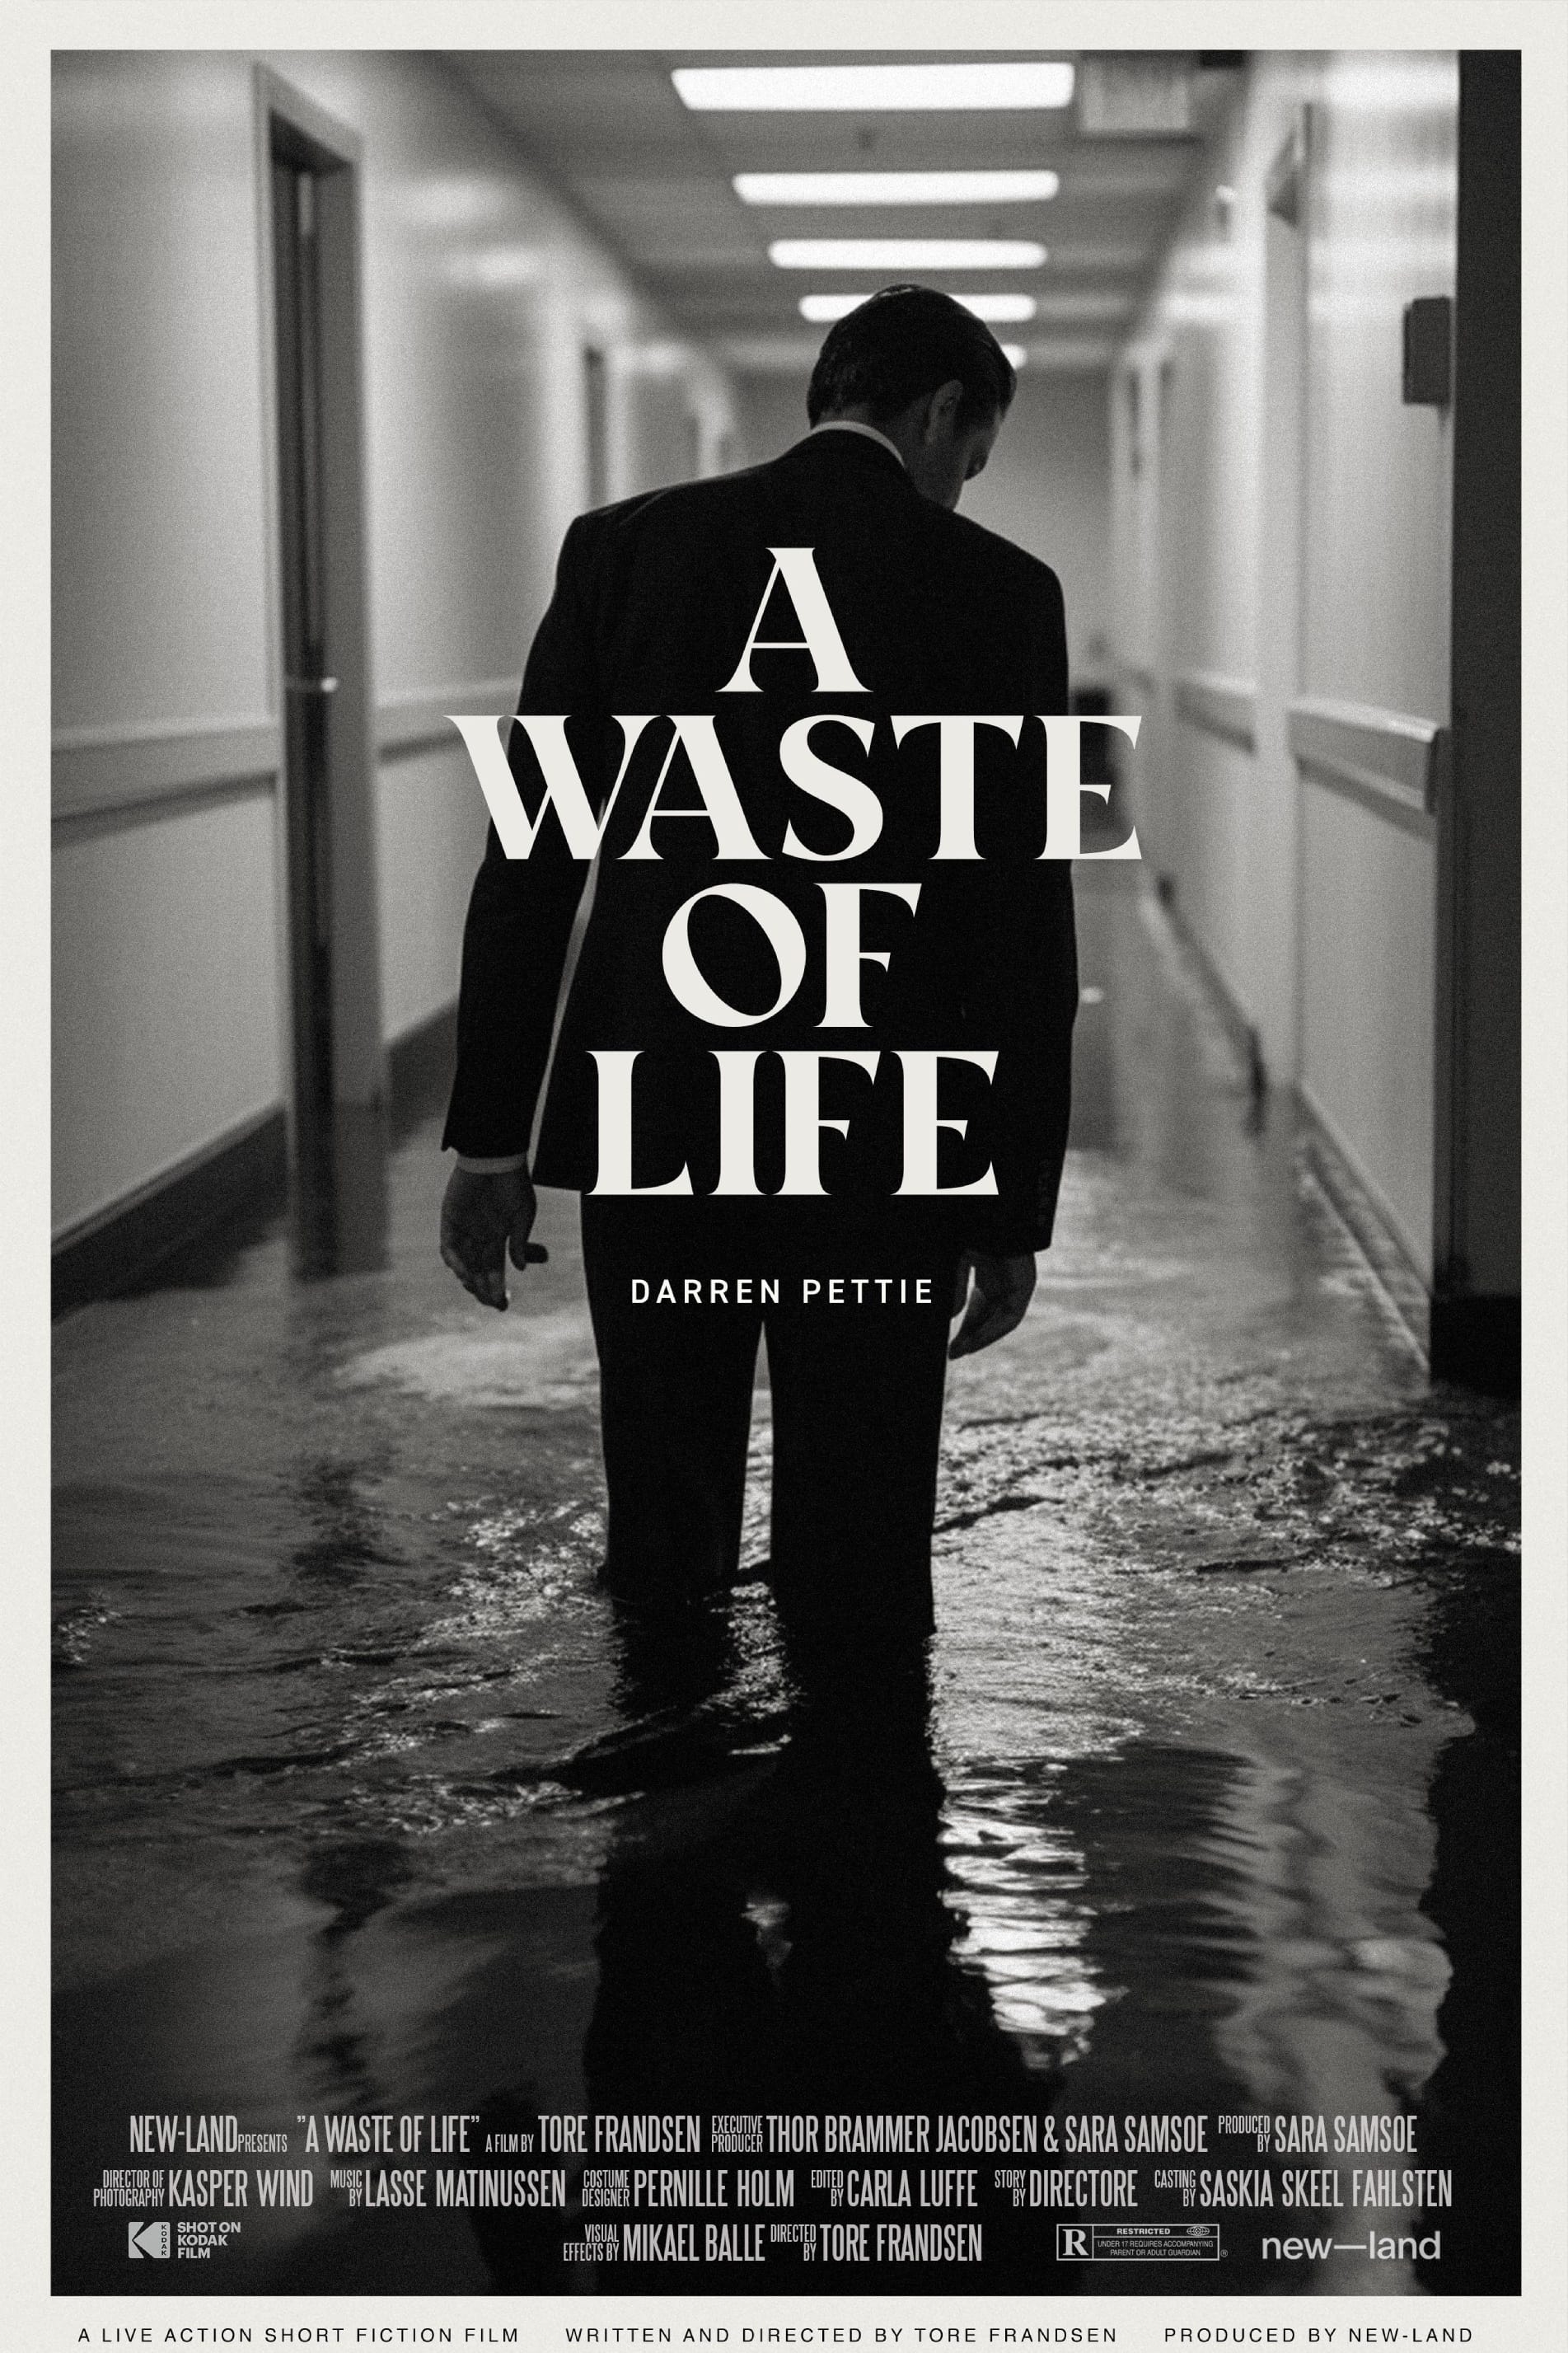 A Waste of Life